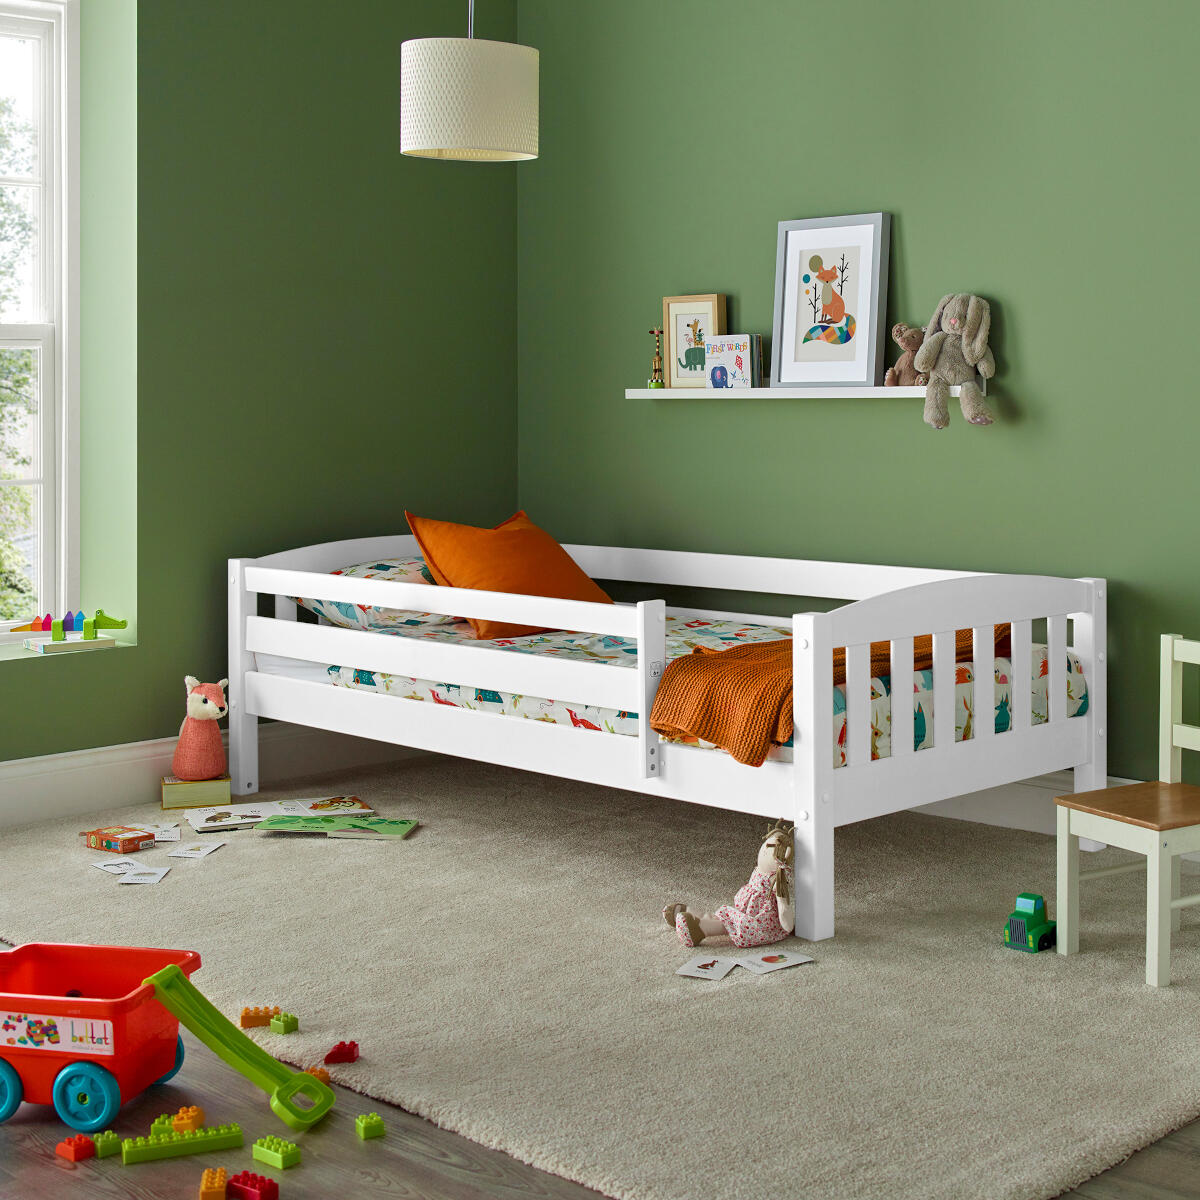 Max White Wooden Combination Bed, Cot Sides For King Size Bed